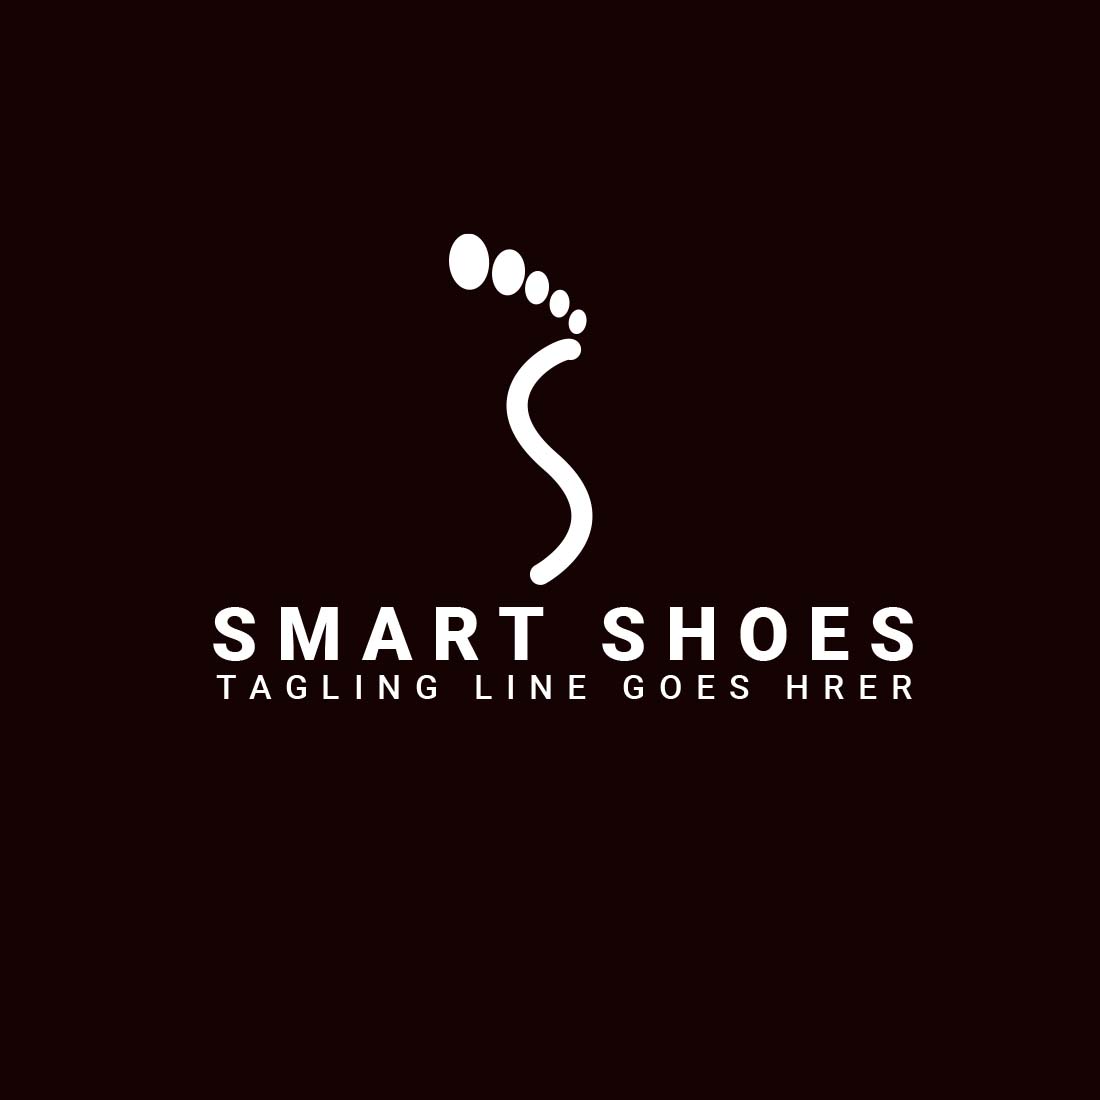 Three shoes brand logos cover image.